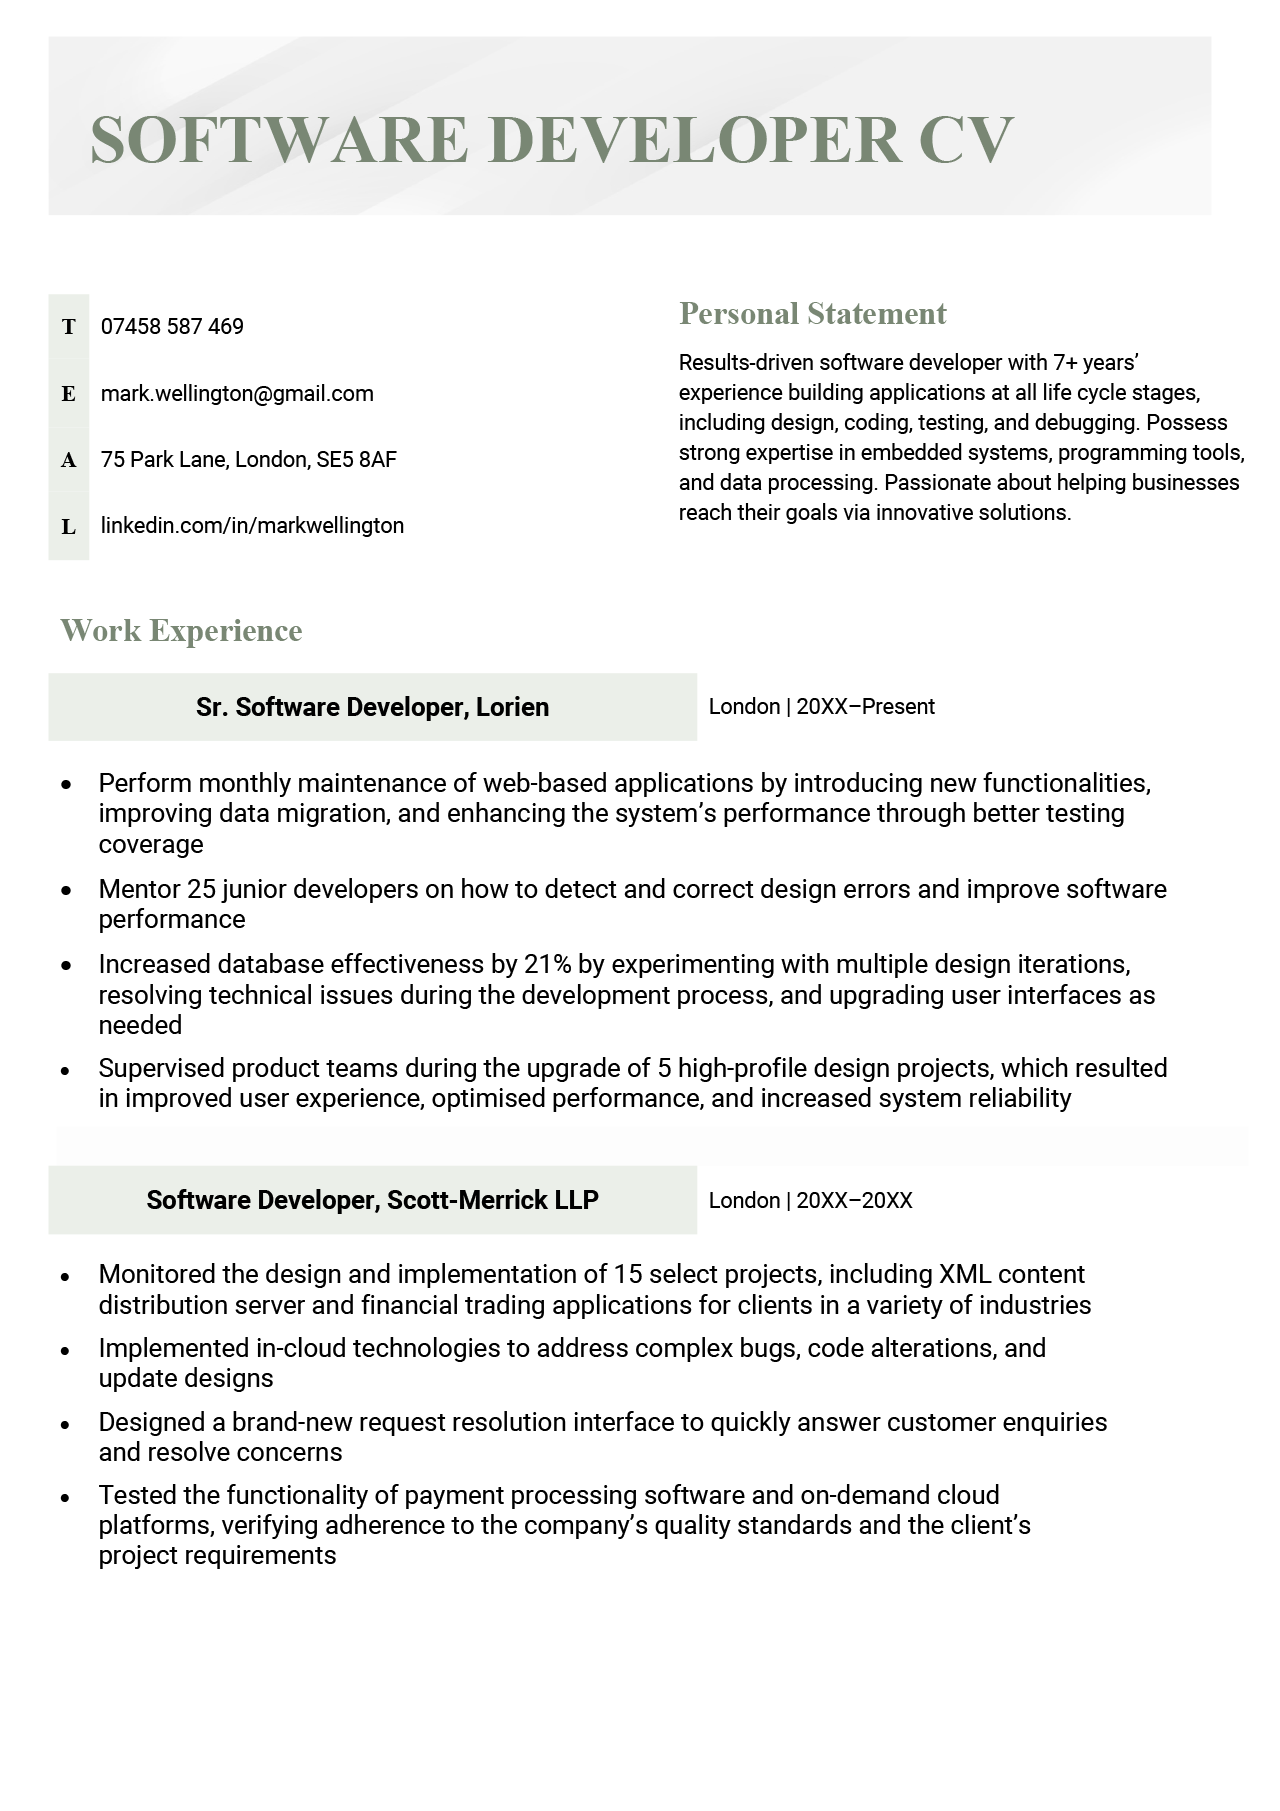 A software developer CV example in a green-themed template.